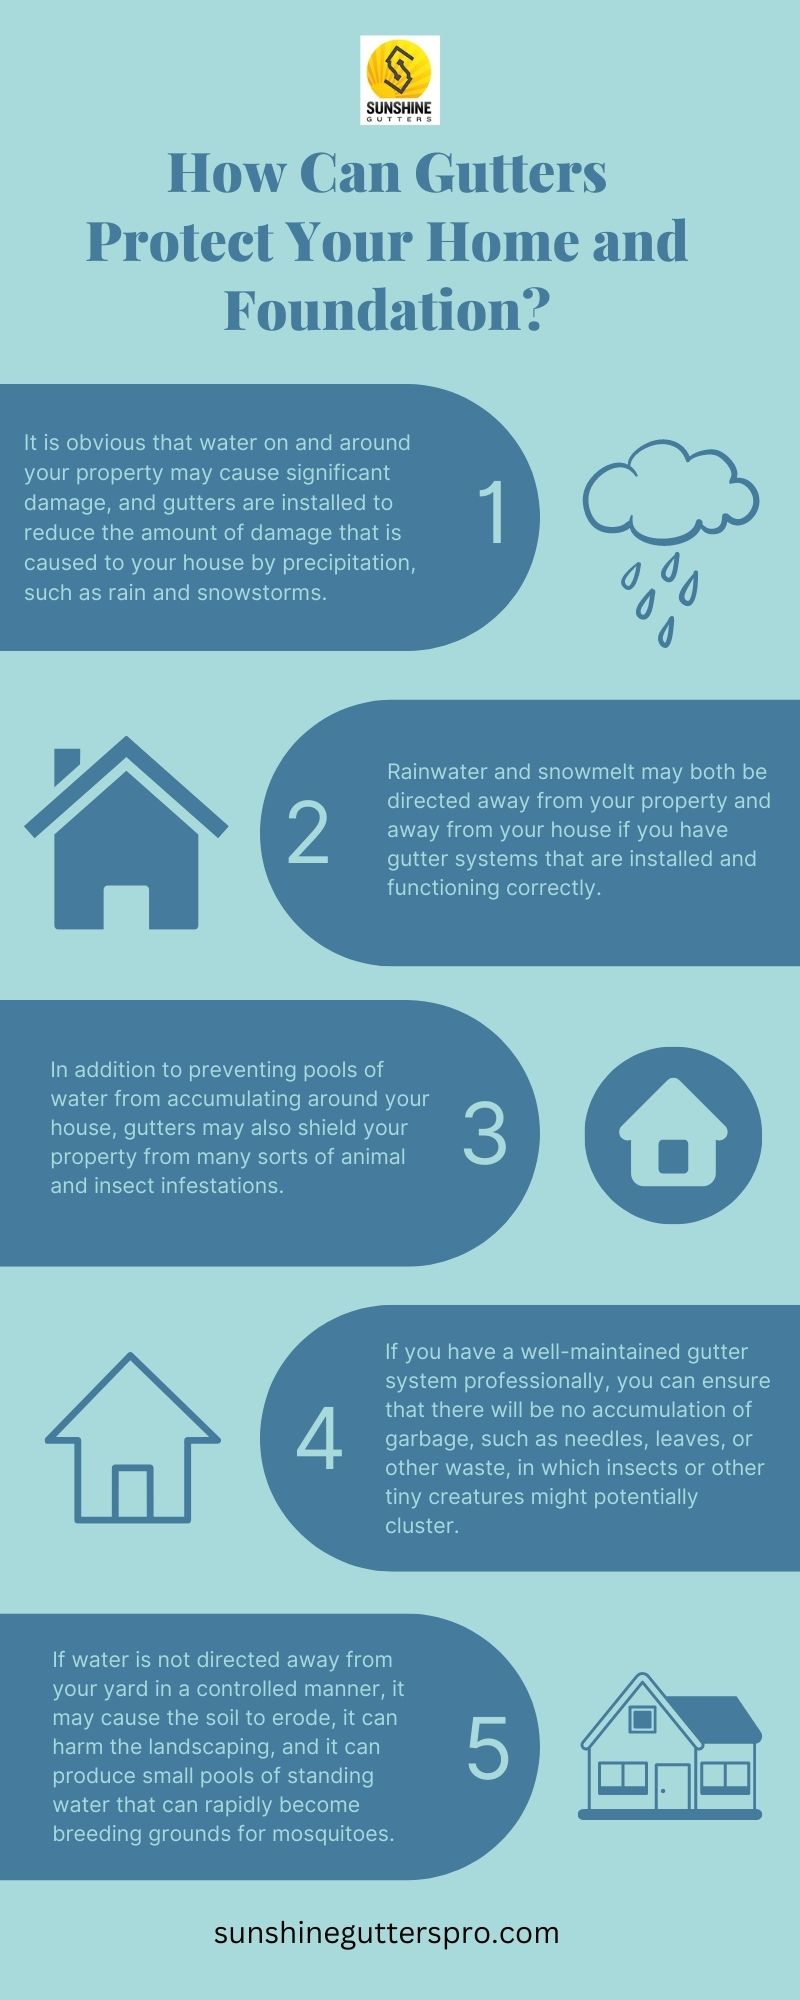 How Can Gutters Protect Your Home and Foundation?